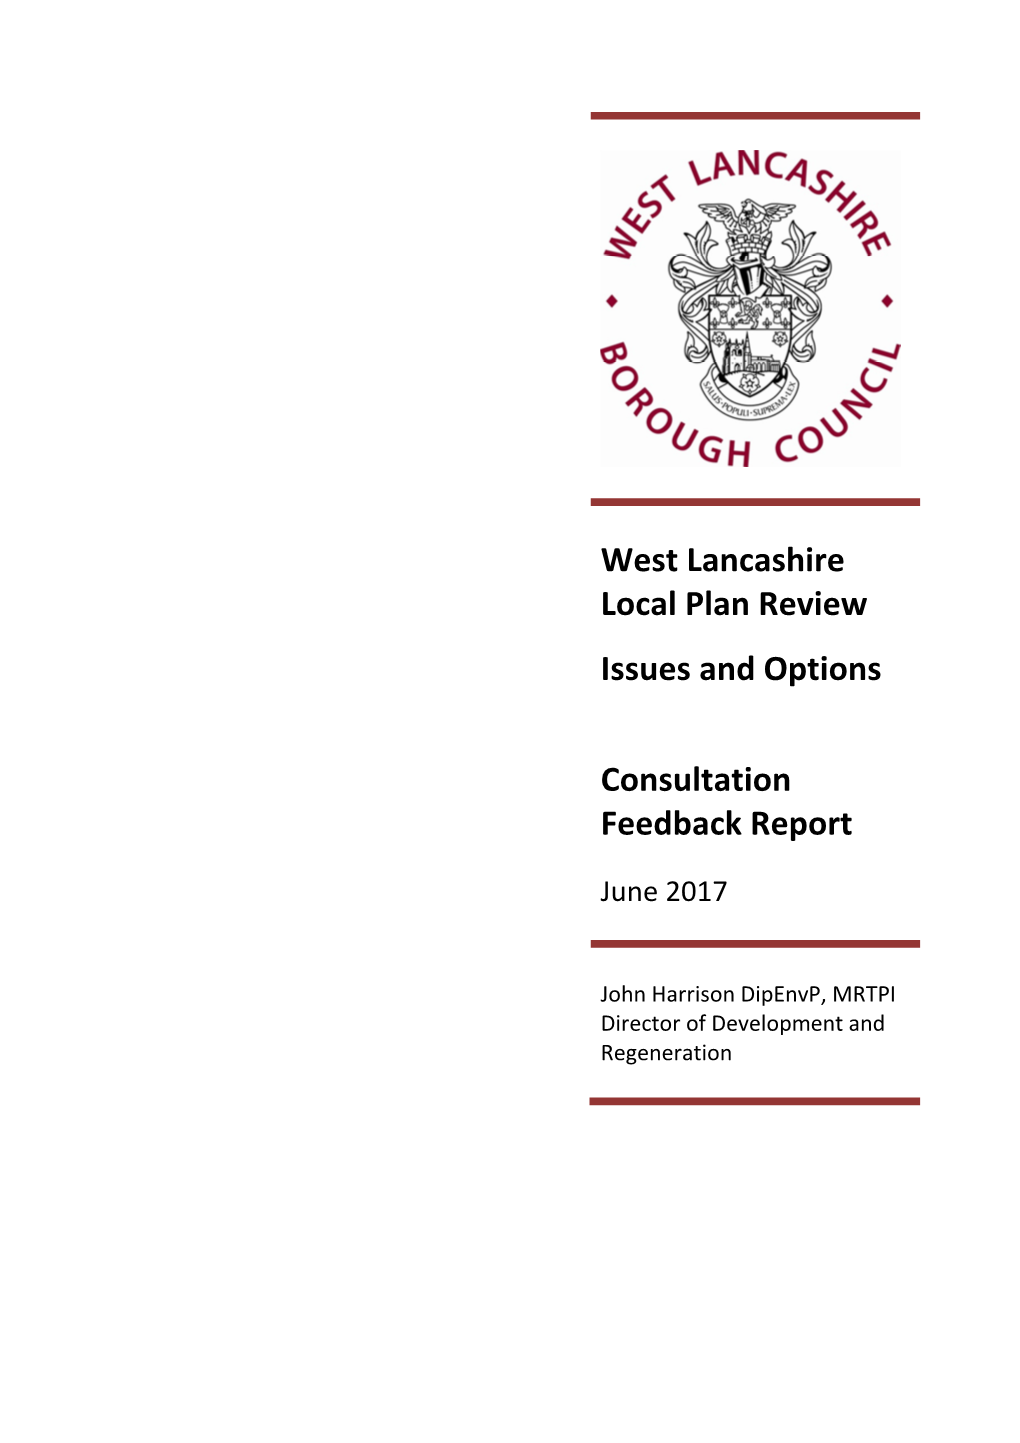 West Lancashire Local Plan Review Issues and Options Consultation Feedback Report